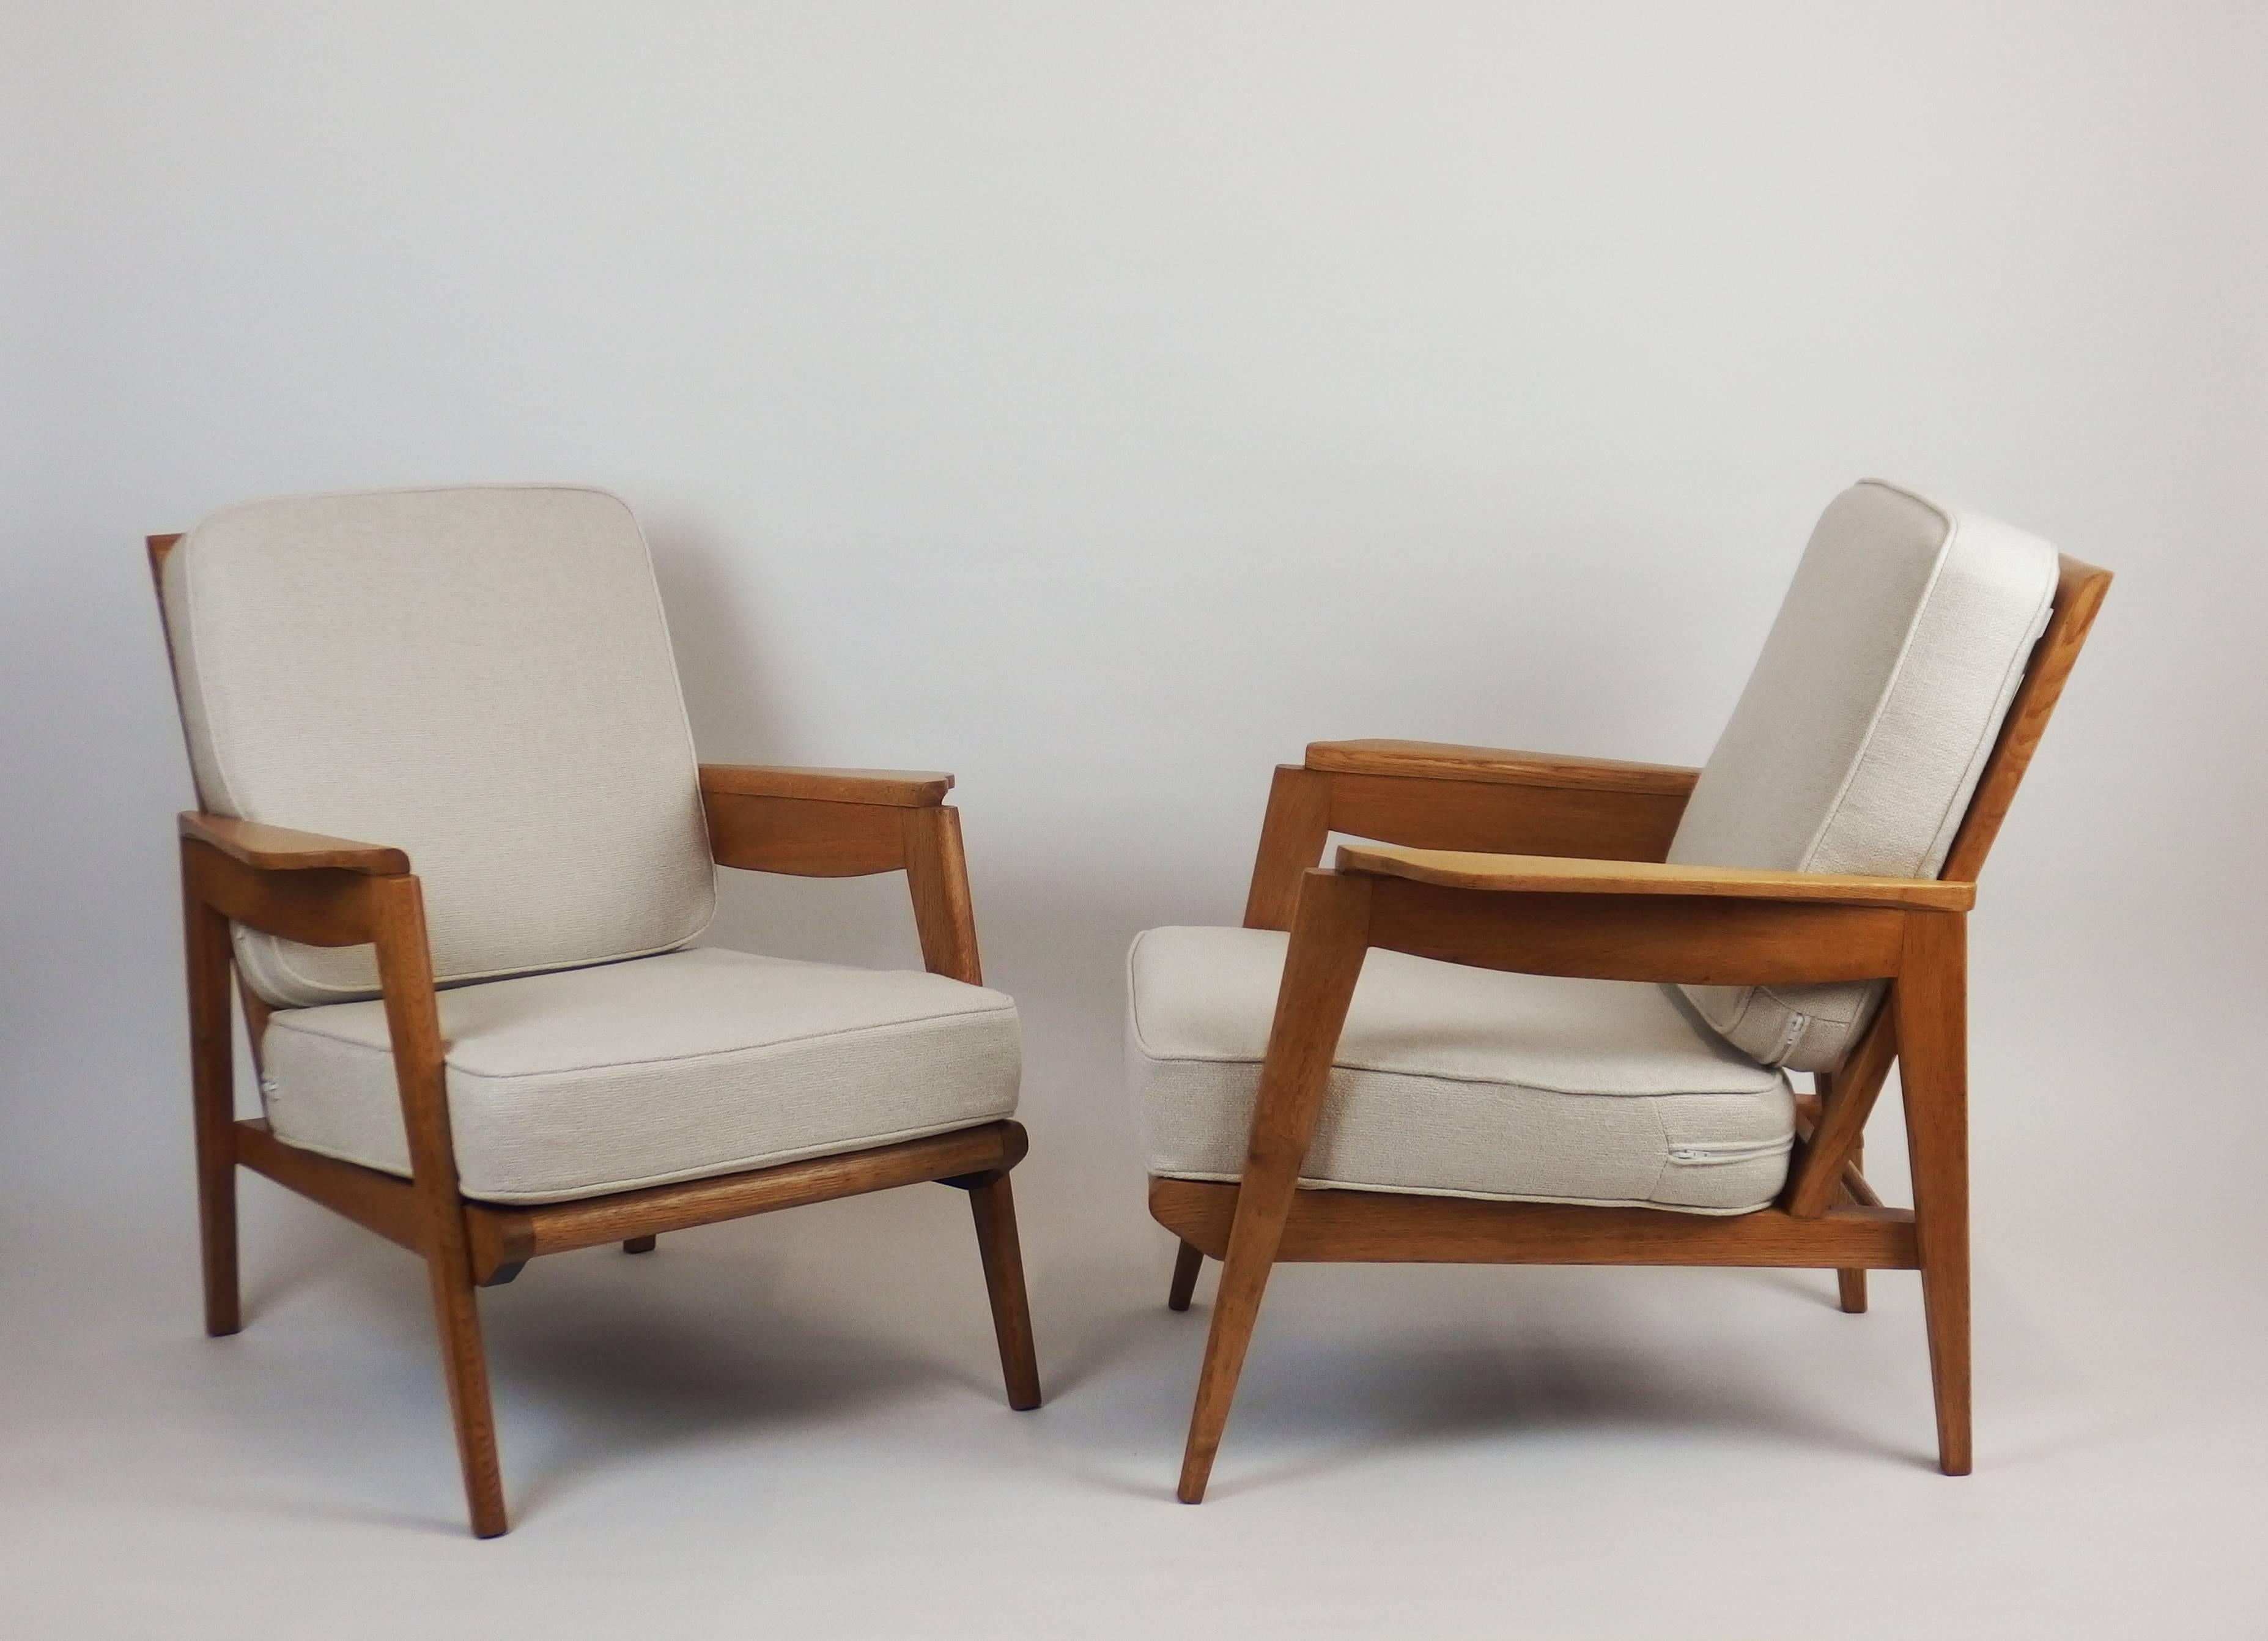 Two solid oak armchairs with new cushions upholstered with linen material .These armchairs were designed by Pierre Roche for the Parisian Ateliers Saint Sabin in the 1950s.
Measure: Seat height 15.30in.